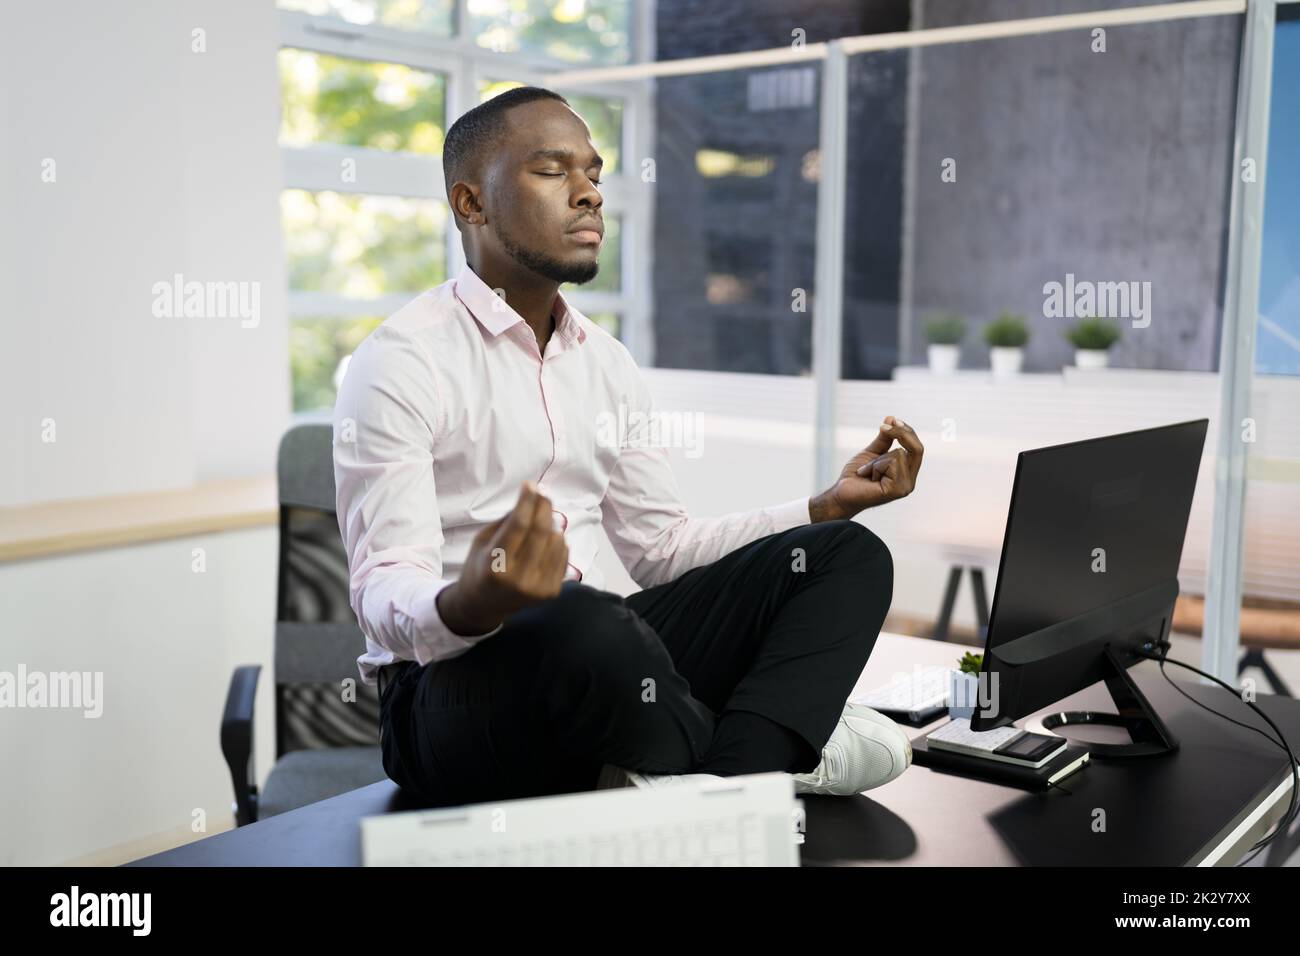 African Employee Doing Mental Health Yoga Meditation In Office Stock Photo